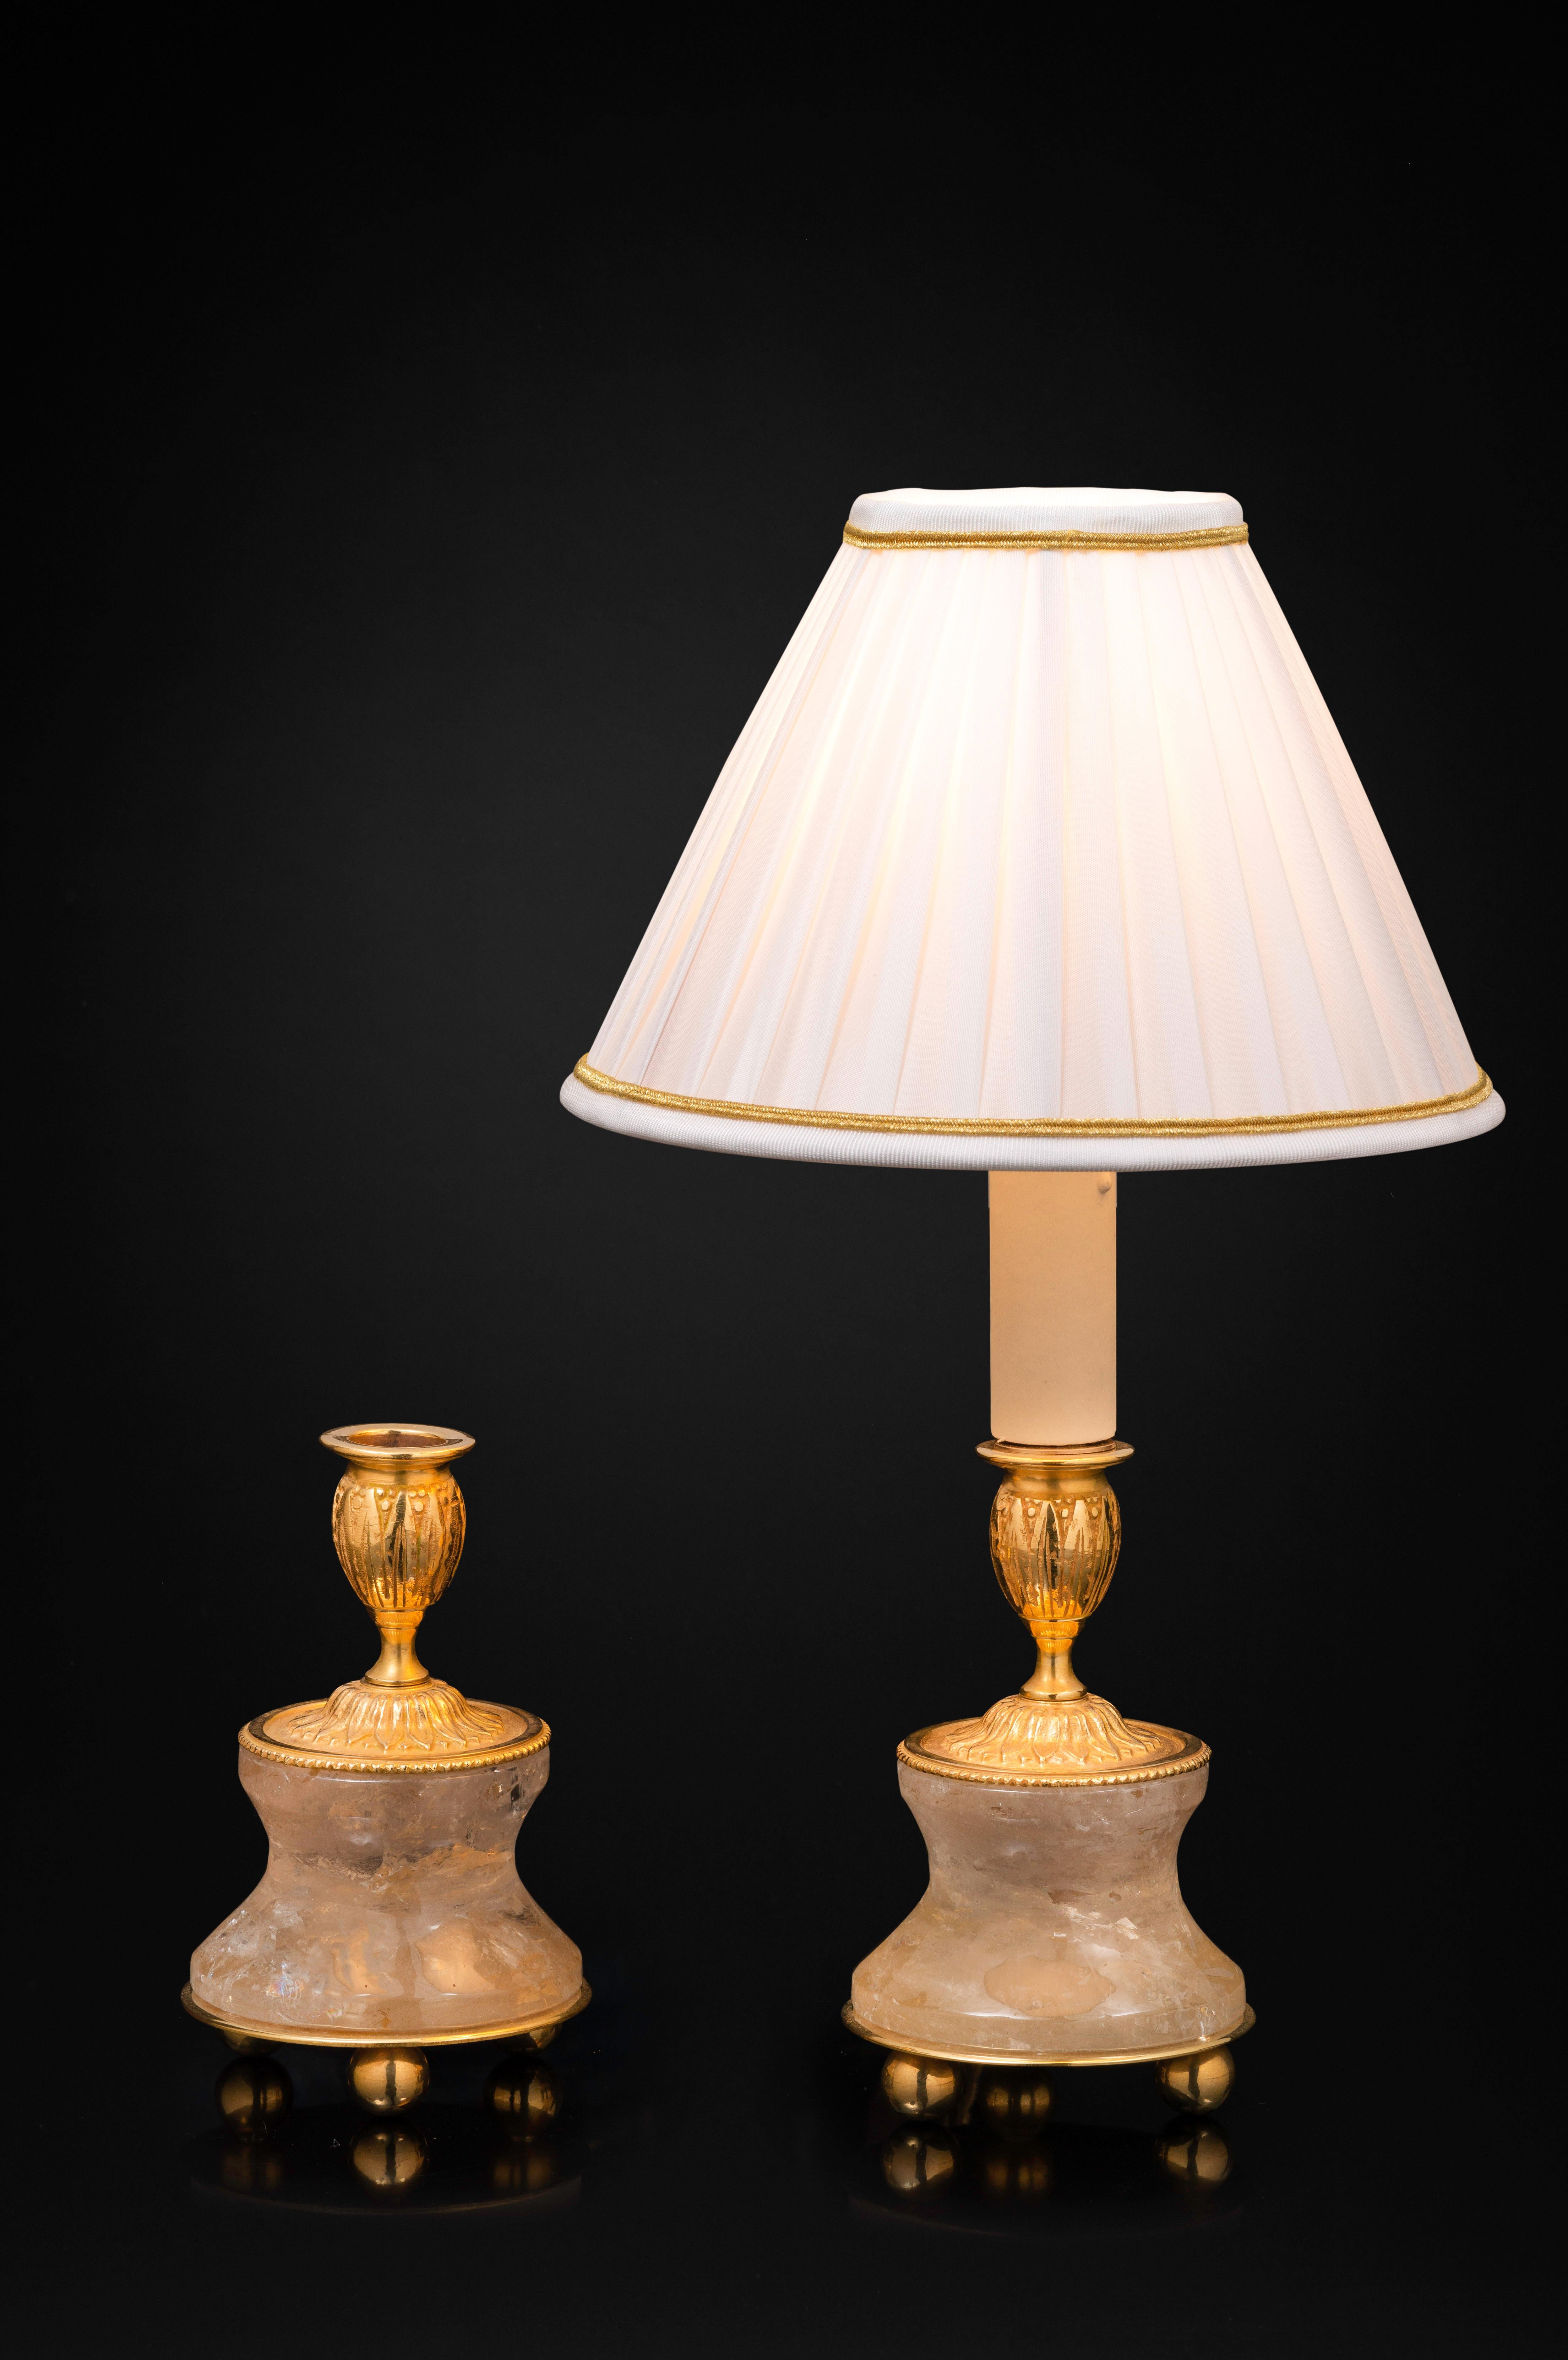 Hand-Carved Pair of Rock Crystal and Gilt-Bronze Lamps/Candlesticks Louis the XVI th Style